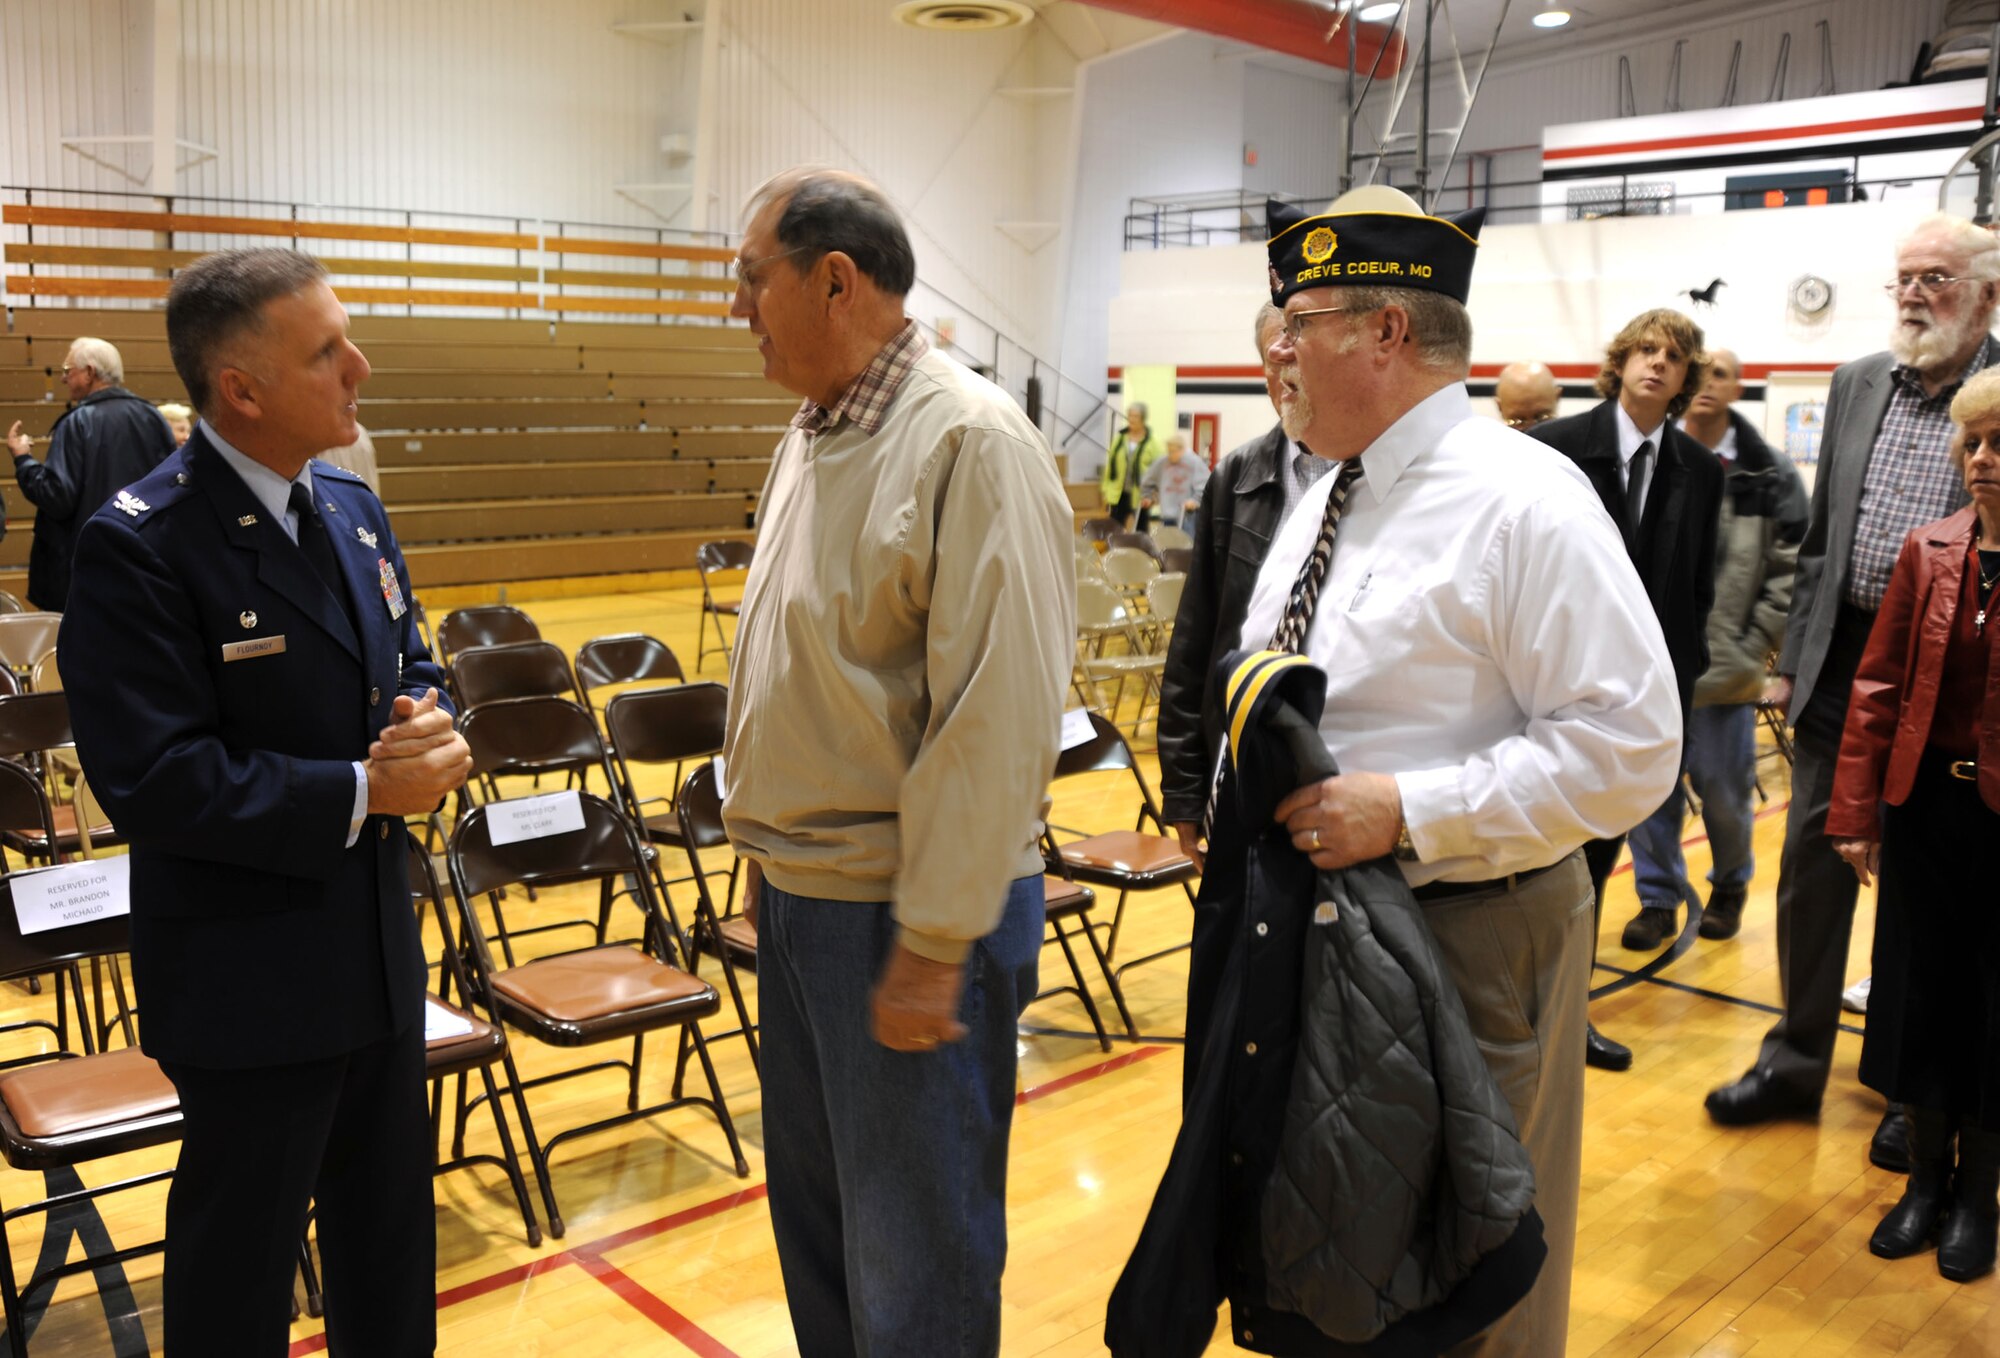 Members of the O'Fallon, Missouri community wait in line to talk with Col. John C. Flournoy, Jr., after his Veteran's Day presentation to students, faculty and the general public at the South Middle School of Fort Zumwalt's school district.  The Colonel is the commander of the 932nd Airlift Wing, Air Force Reserve, located at Scott Air Force Base near Belleville, Ill.  (U.S. Air Force photo/Tech. Sgt. Gerald Sonnenberg)